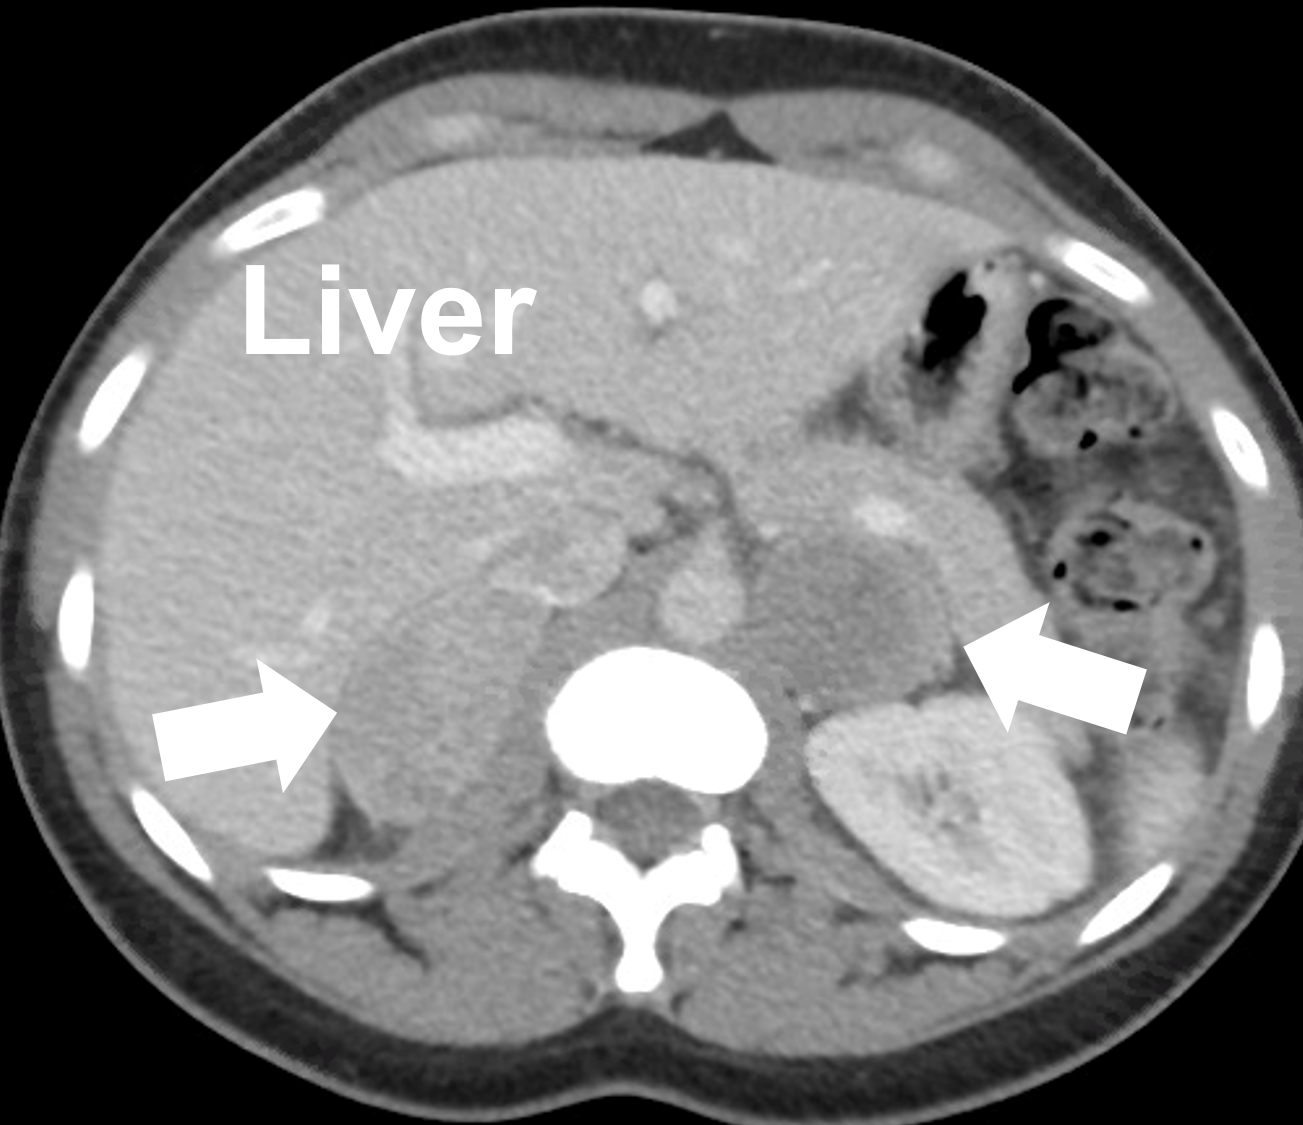 Bilateral (both left and right) pheochromocytomas seen on a CT scan (arrows) in a young patient with inherited pheochromocytomas due to multiple endocrine neoplasia type 2A.